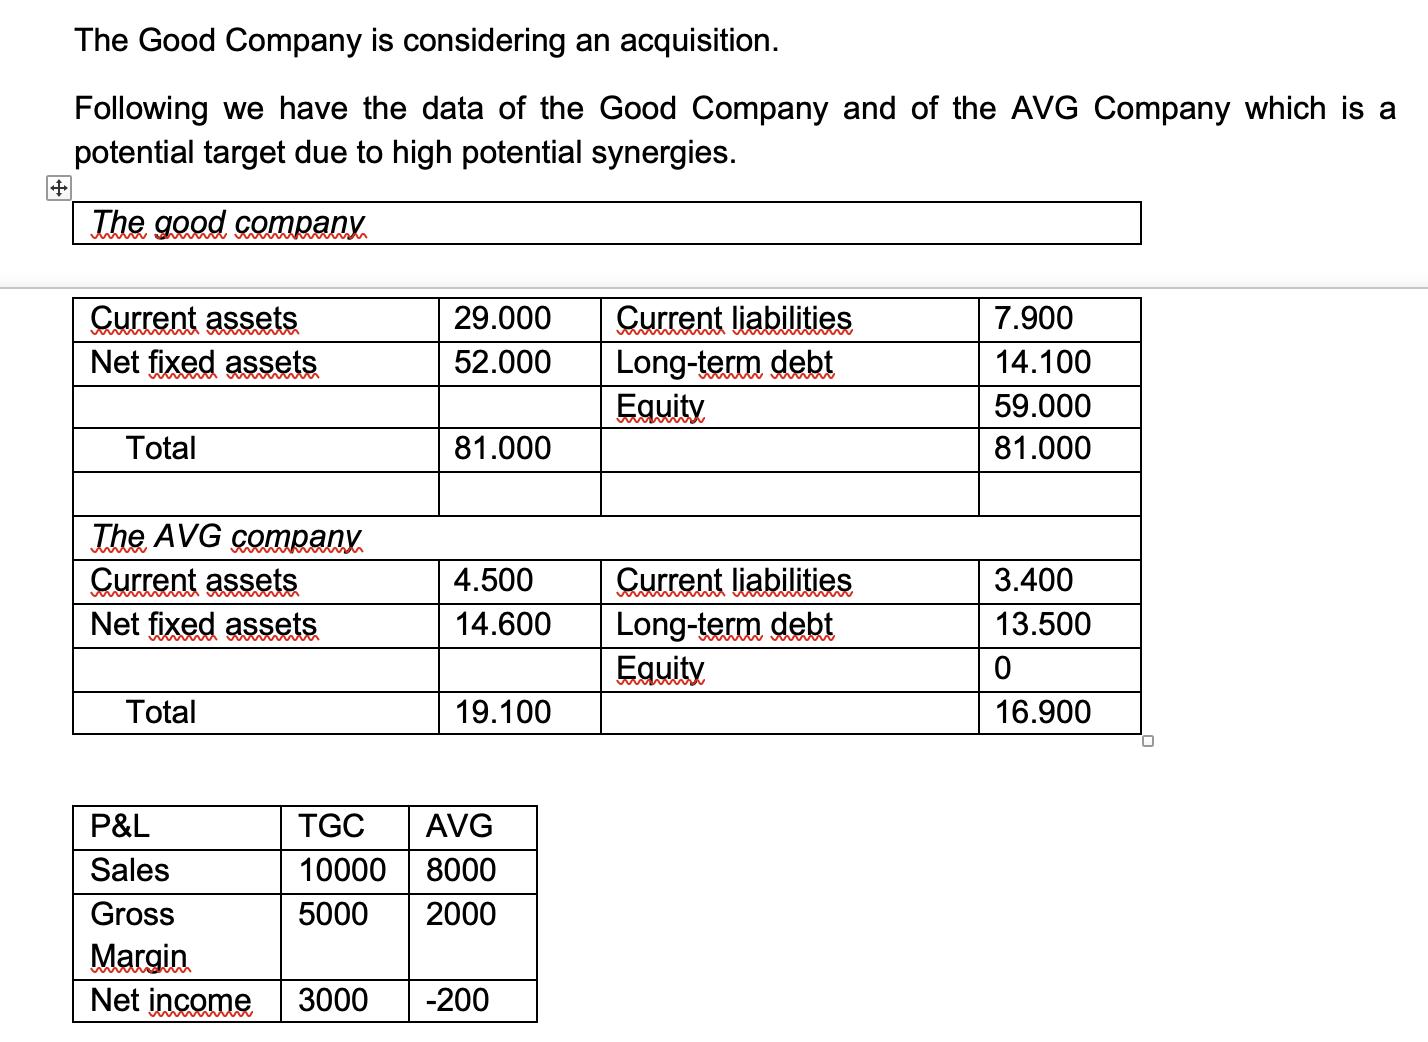 The Good Company is considering an acquisition. Following we have the data of the Good Company and of the AVG